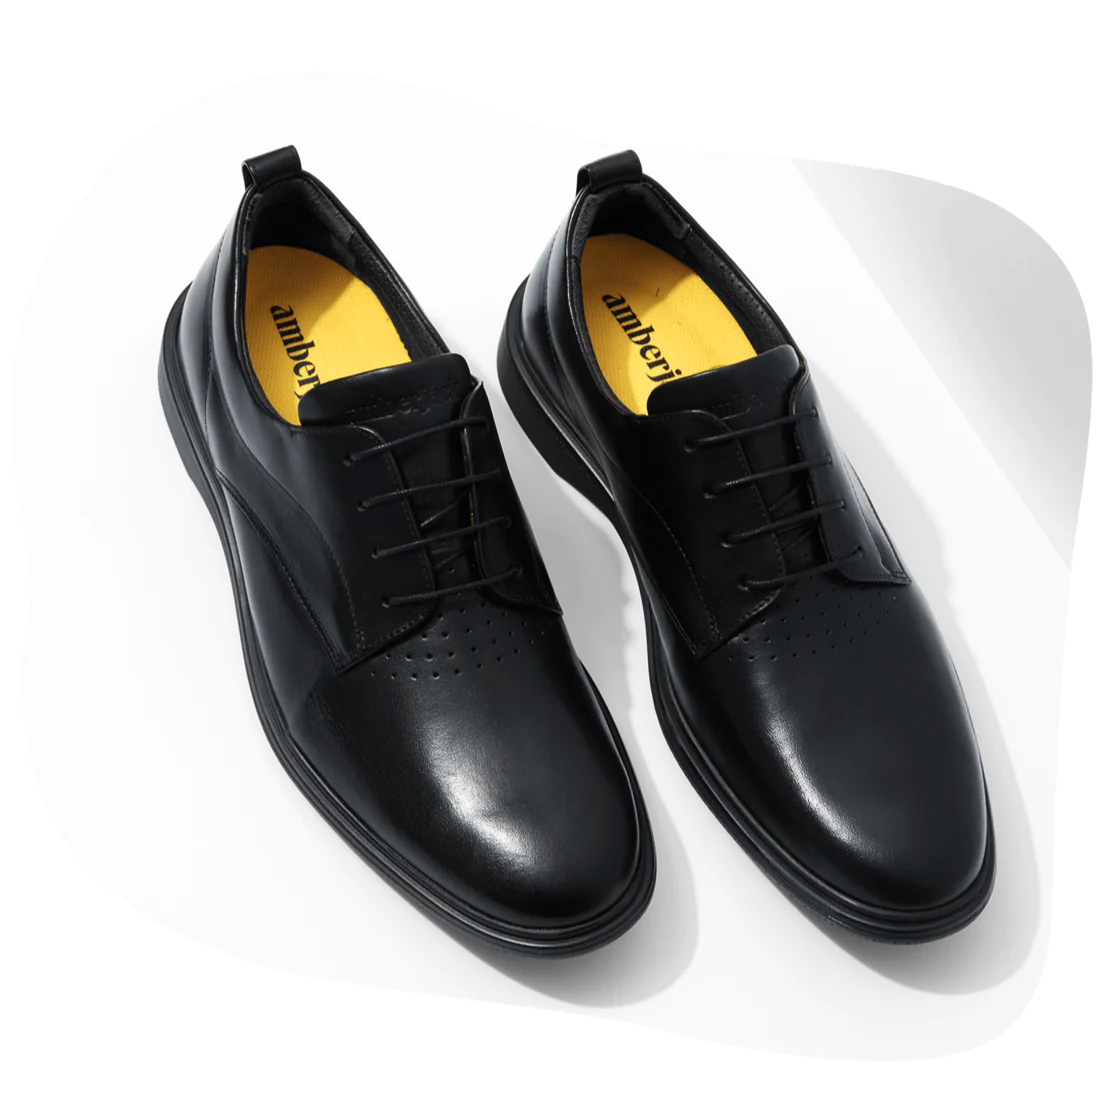 obsidian men's dress shoes for physical therapists